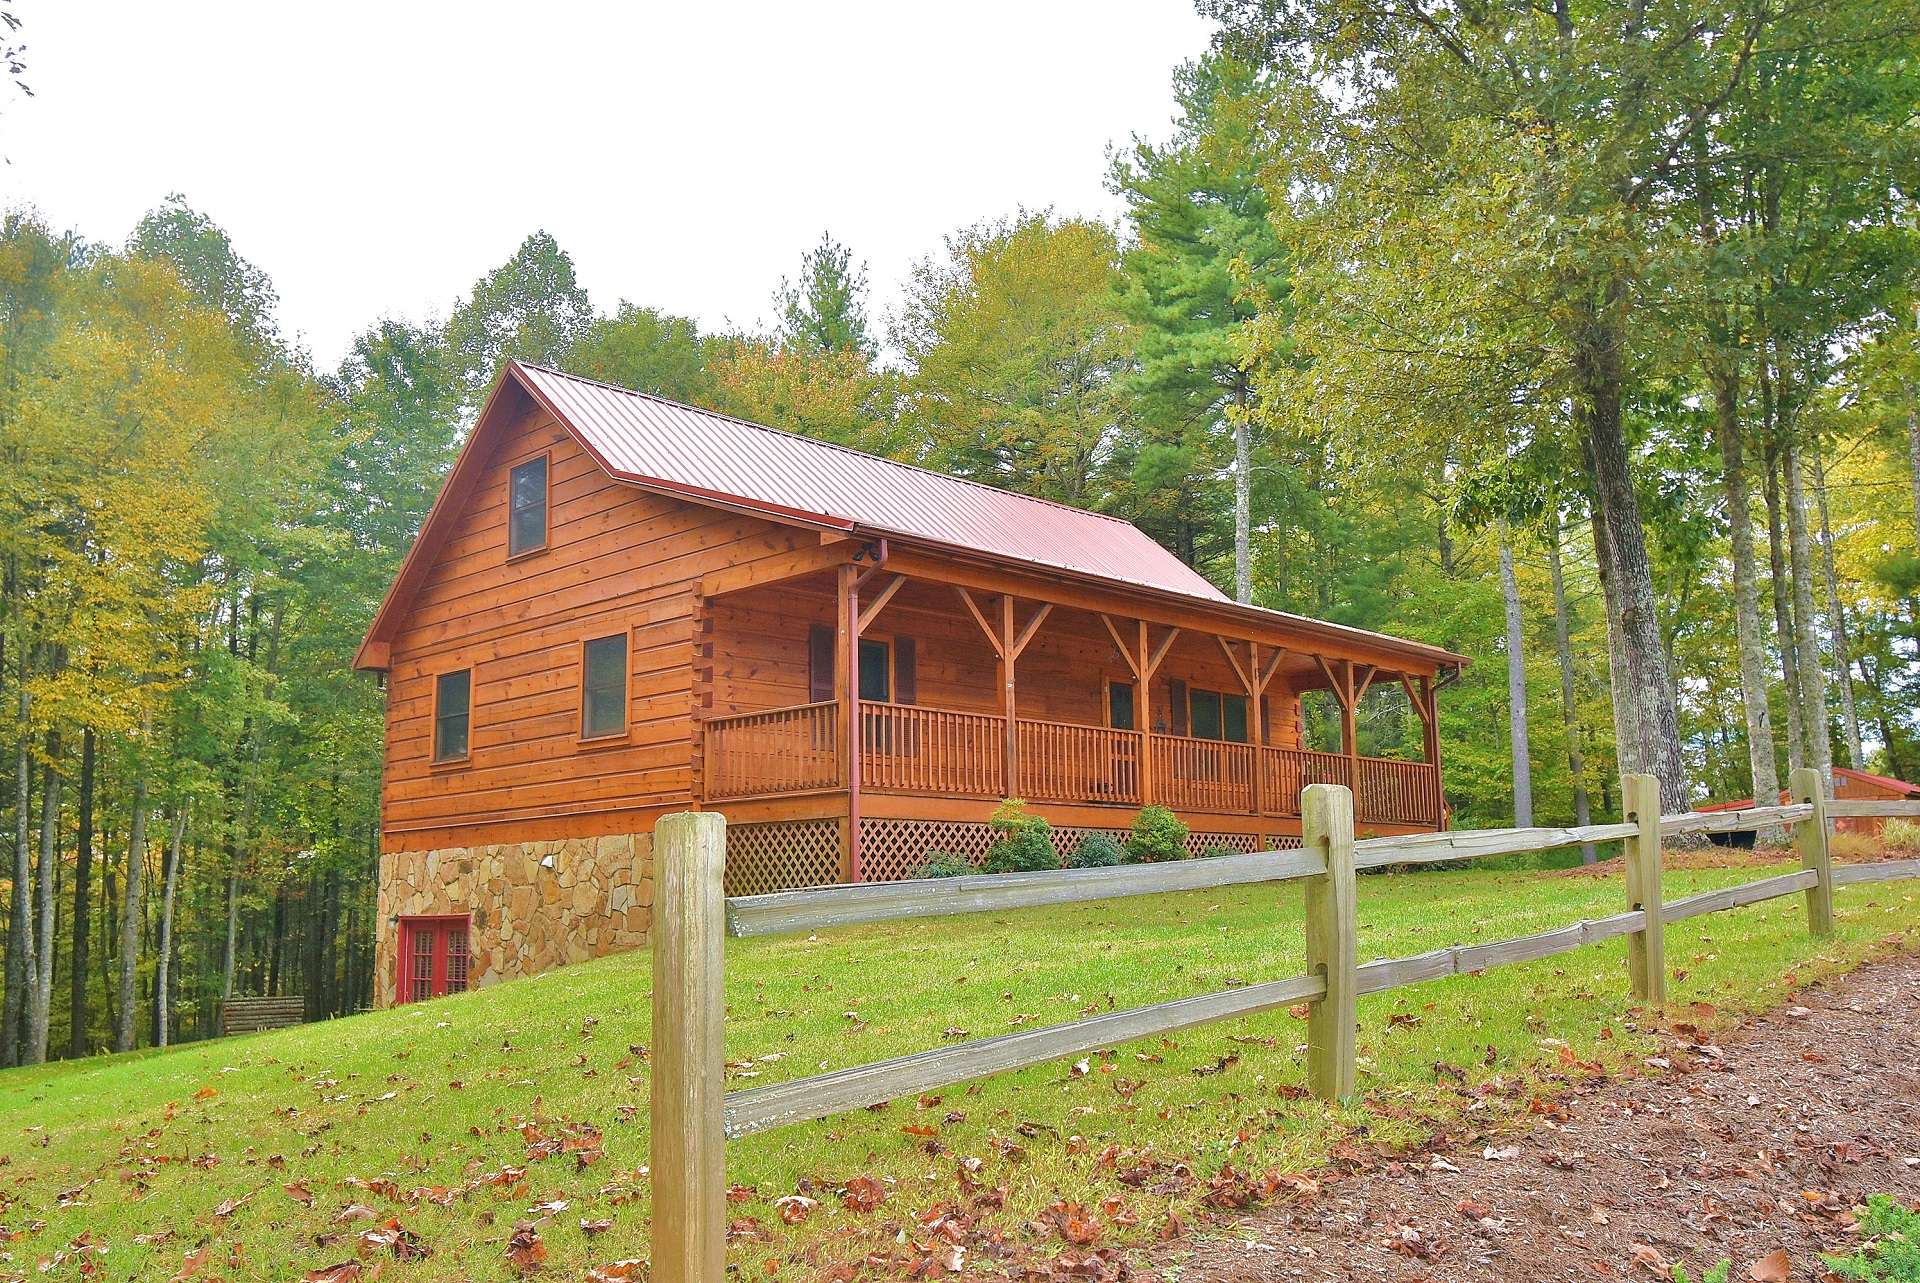 Offered at $315,000, this immaculate 2-bedroom, 2-bath log cabin is well maintained and move-in ready. The location is convenient to West Jefferson, Boone, the New River, and many recreational destinations of the NC High Country. Call for more information or an appointment to view listing S173.  *REDUCED!